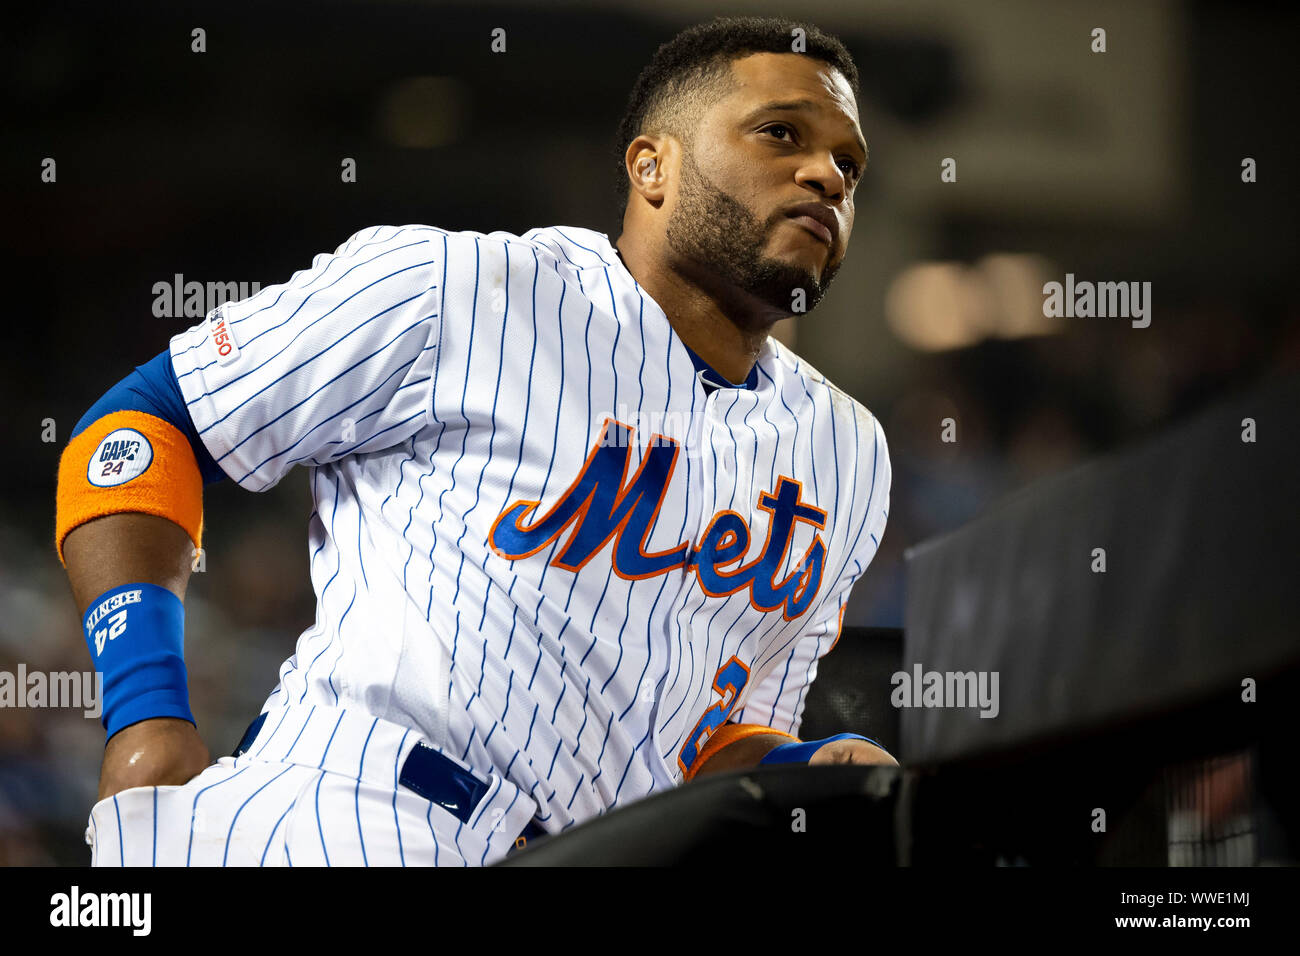 Queens, New York, USA. 13th Sep, 2019. New York Mets second baseman Robinson Cano (24) looks on from the top of the dugout during the game between The New York Mets and The Los Angeles Dodgers at Citi Field in Queens, New York. Mandatory credit: Kostas Lymperopoulos/CSM/Alamy Live News Stock Photo